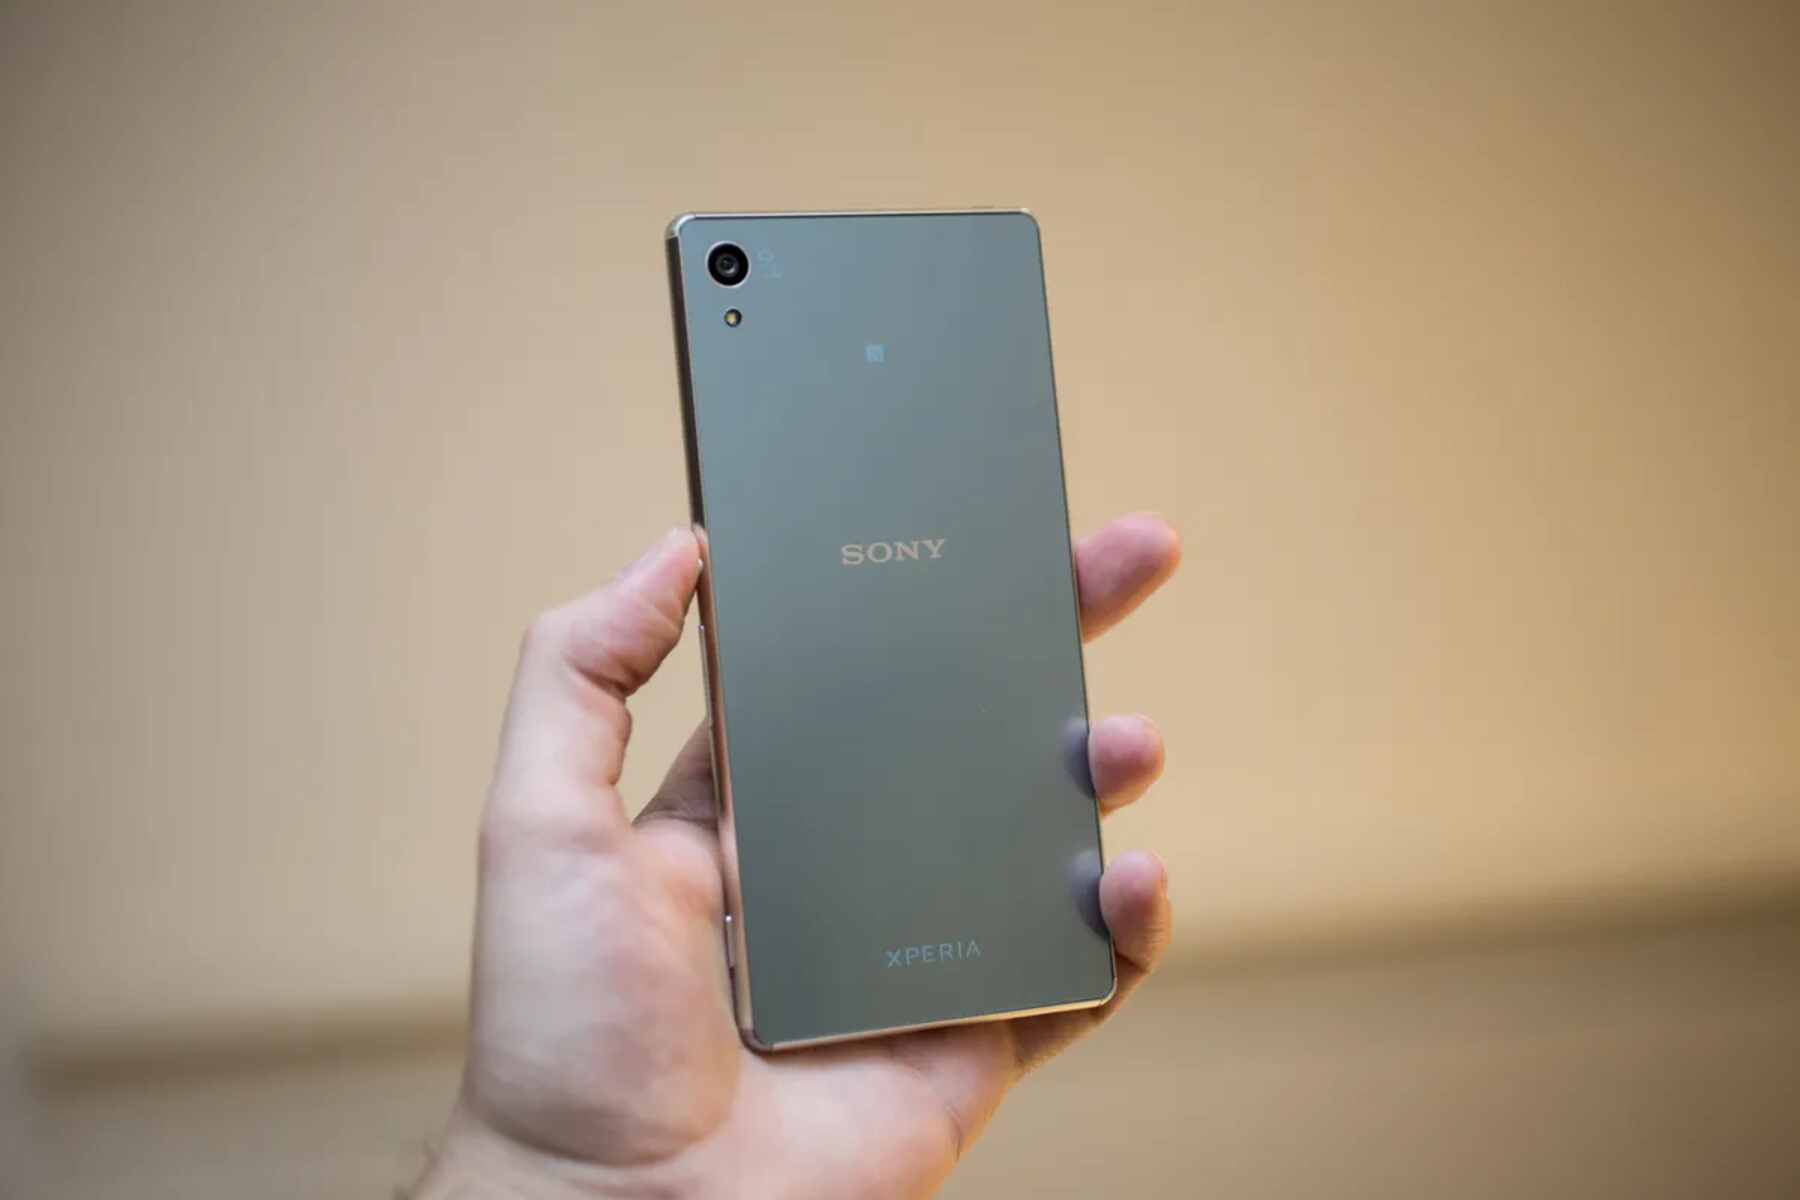 Quick And Easy Reboot Guide For Sony Xperia Z3